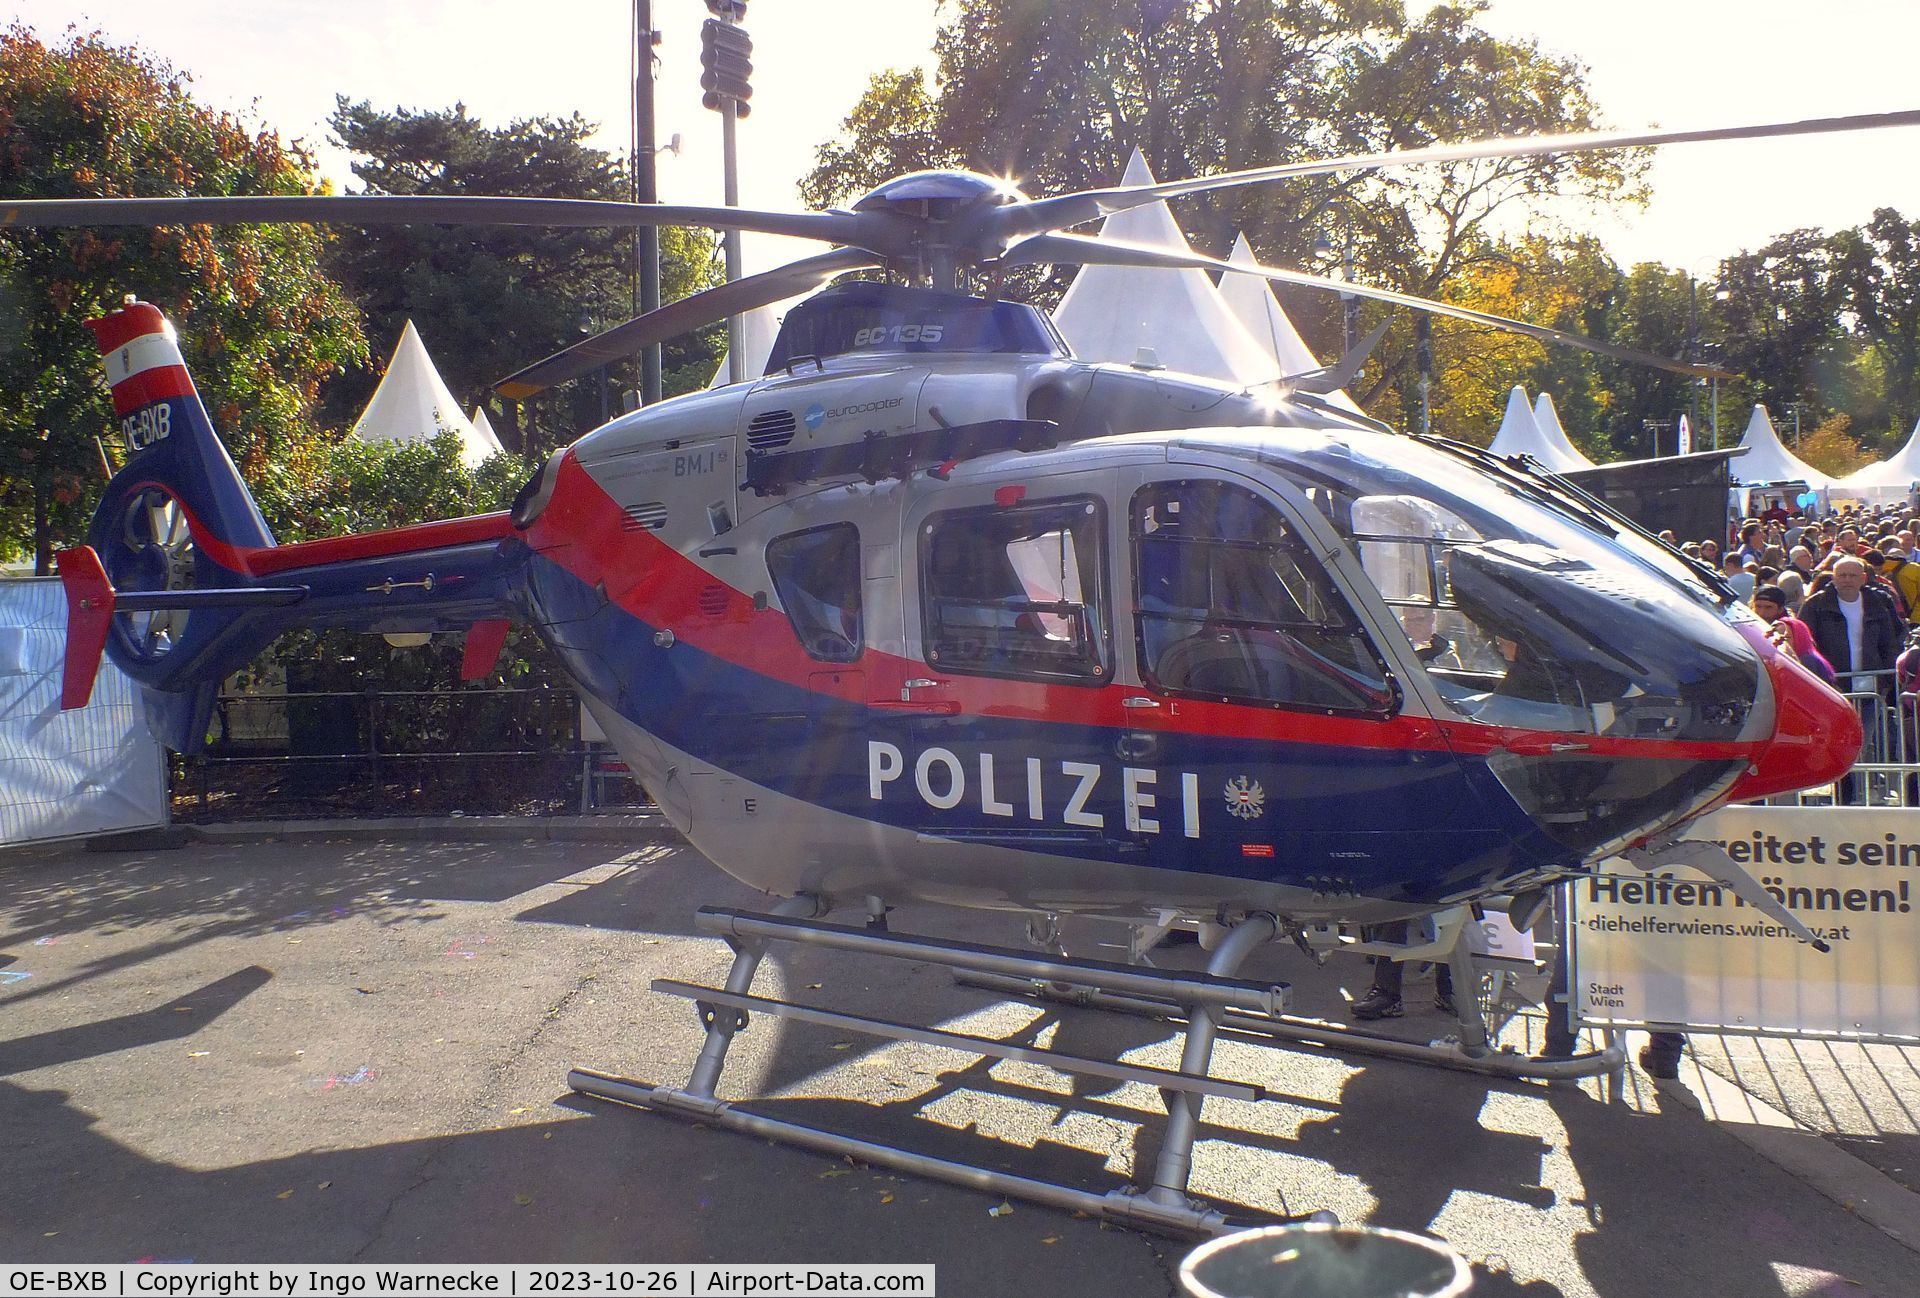 OE-BXB, 2009 Eurocopter EC-135P-2+ C/N 0783, Eurocopter EC135P-2+ of the austrian police at the Austrian National Day celebrations in Vienna (Nationalfeiertag 2023, Wien Sicherheitsfest) in front of the old town hall